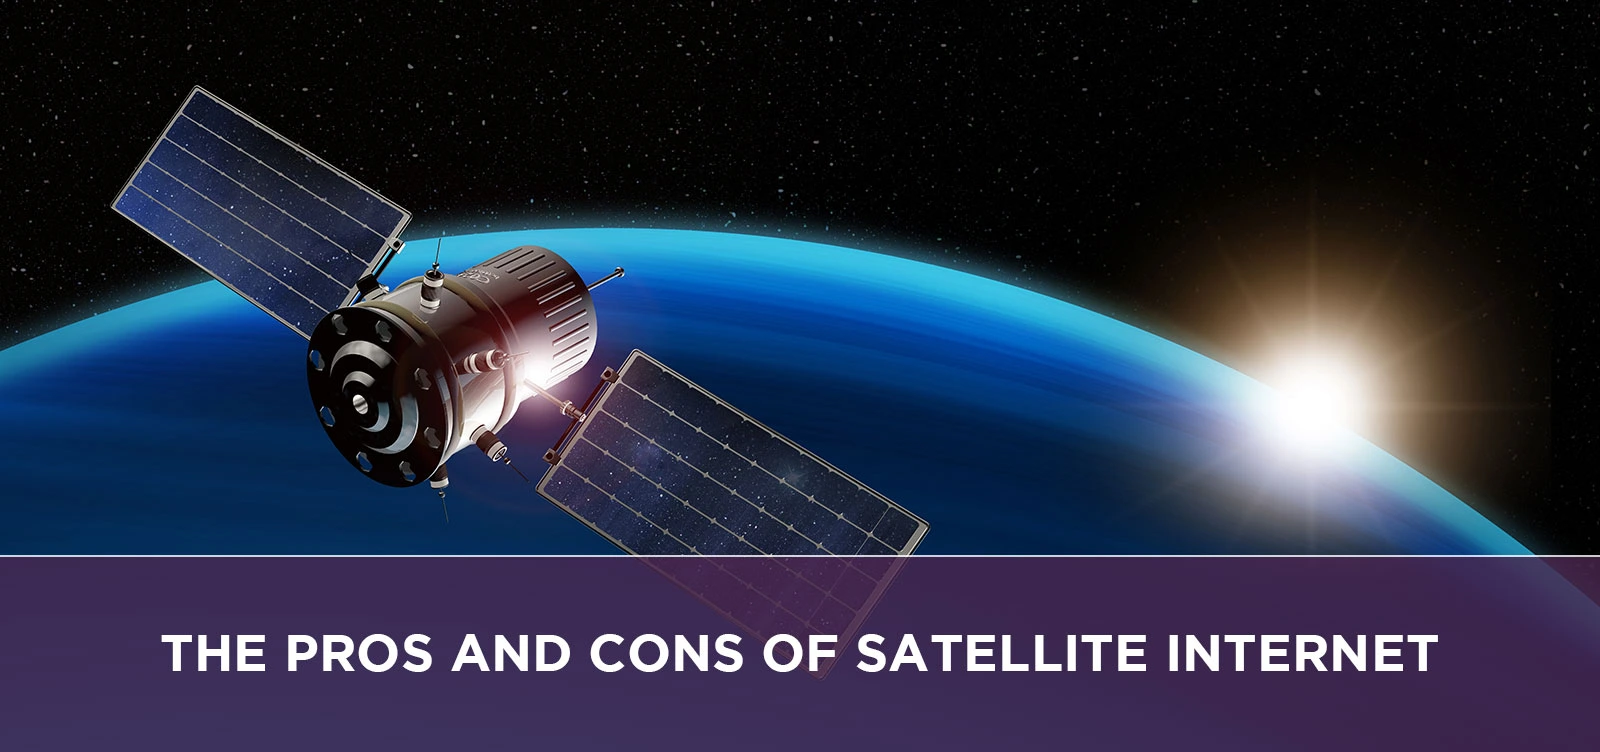 The Pros and Cons of Satellite Internet